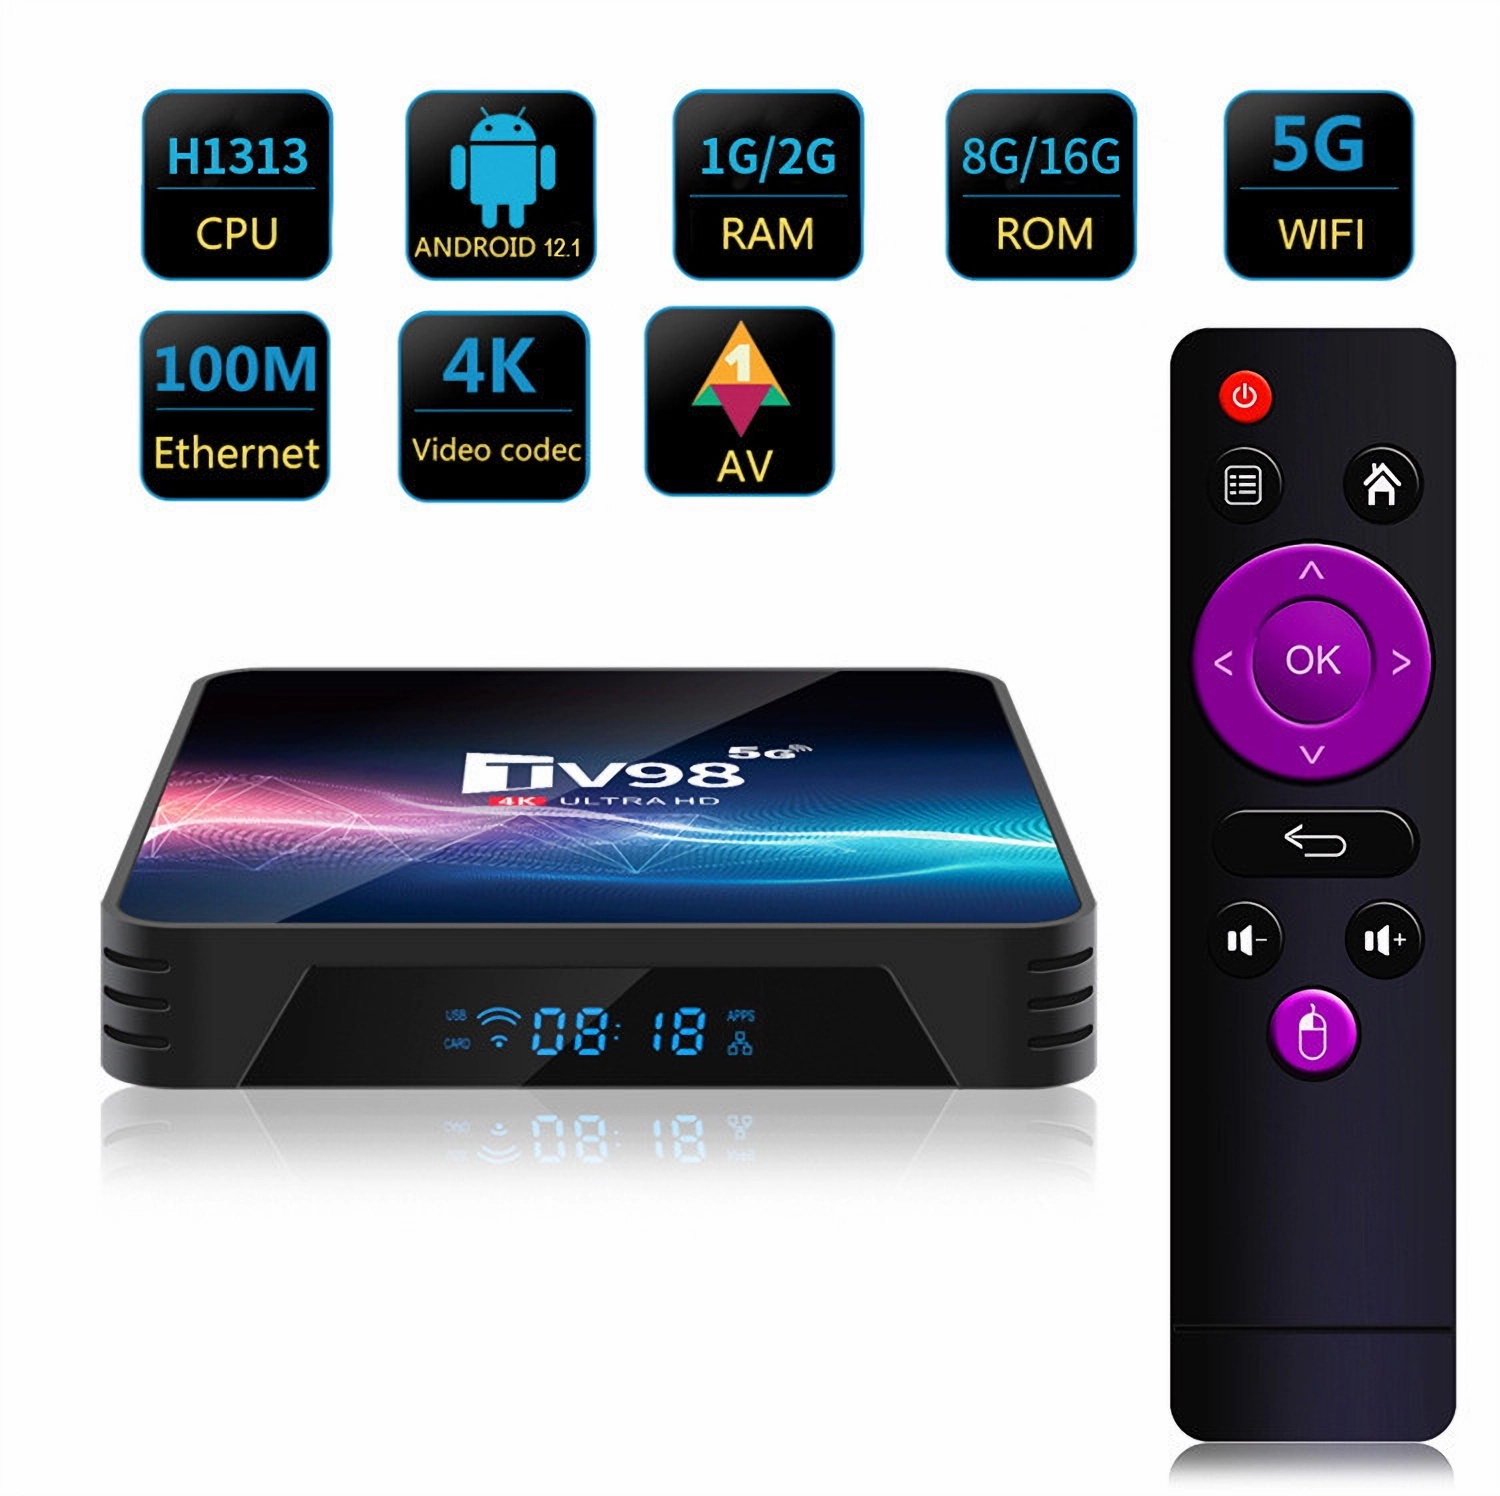 2GB+16GB Android WiFi, Ultimative Box Android - Box 4K TV BRIGHTAKE Dual-Band TV